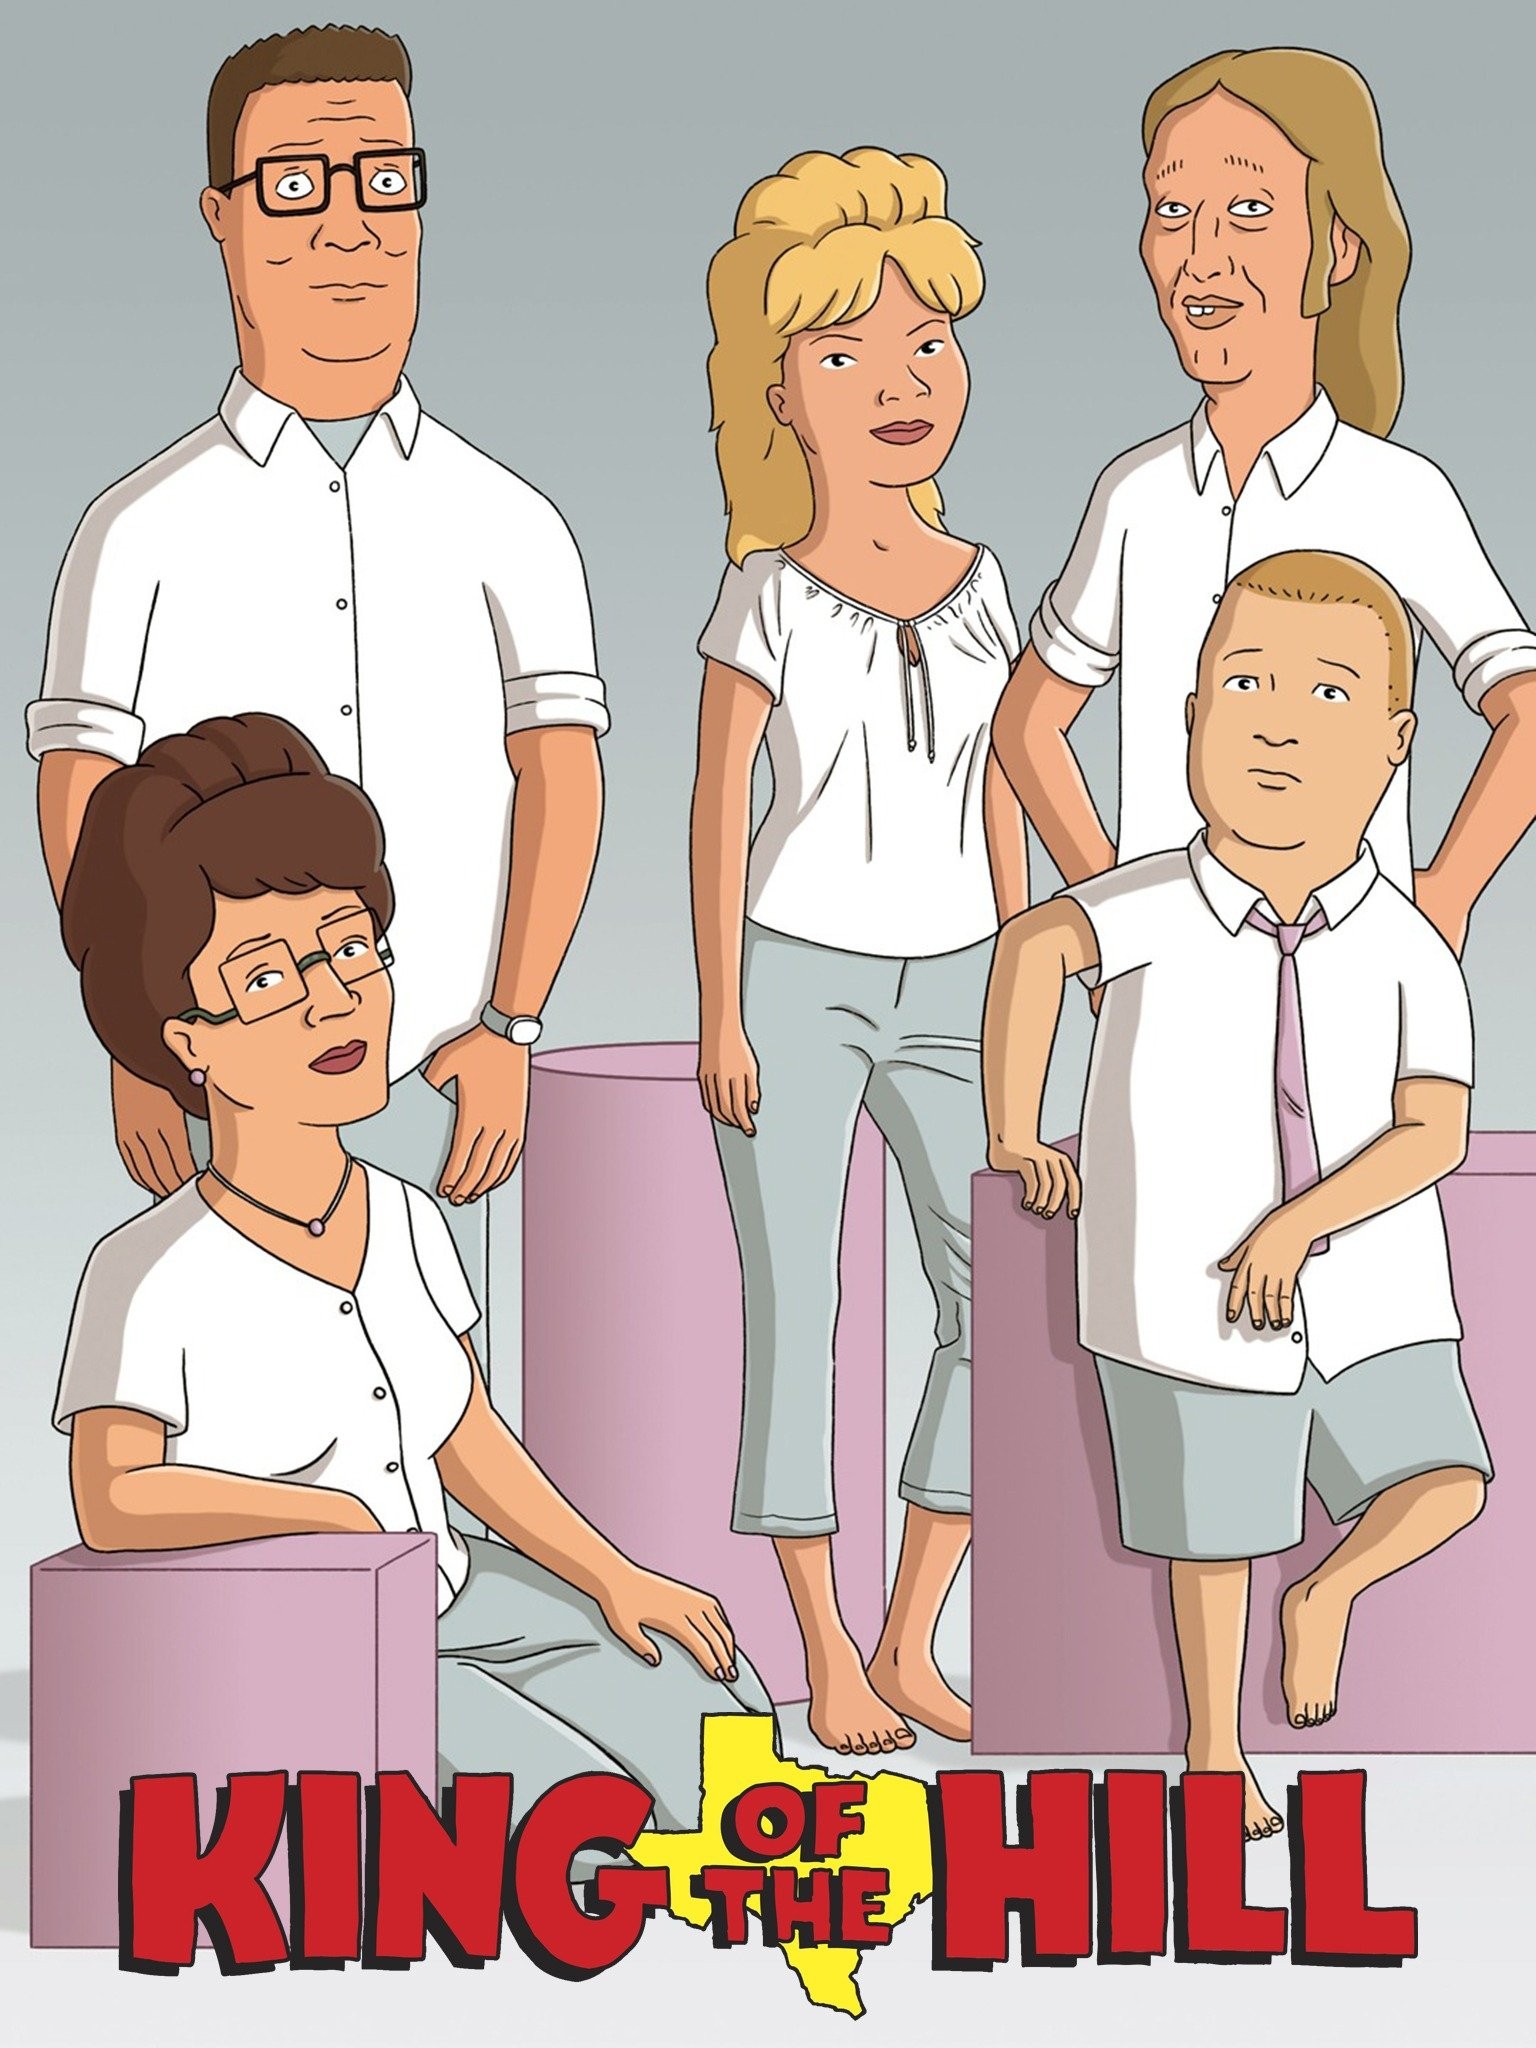 Watch King of the Hill season 6 episode 10 streaming online